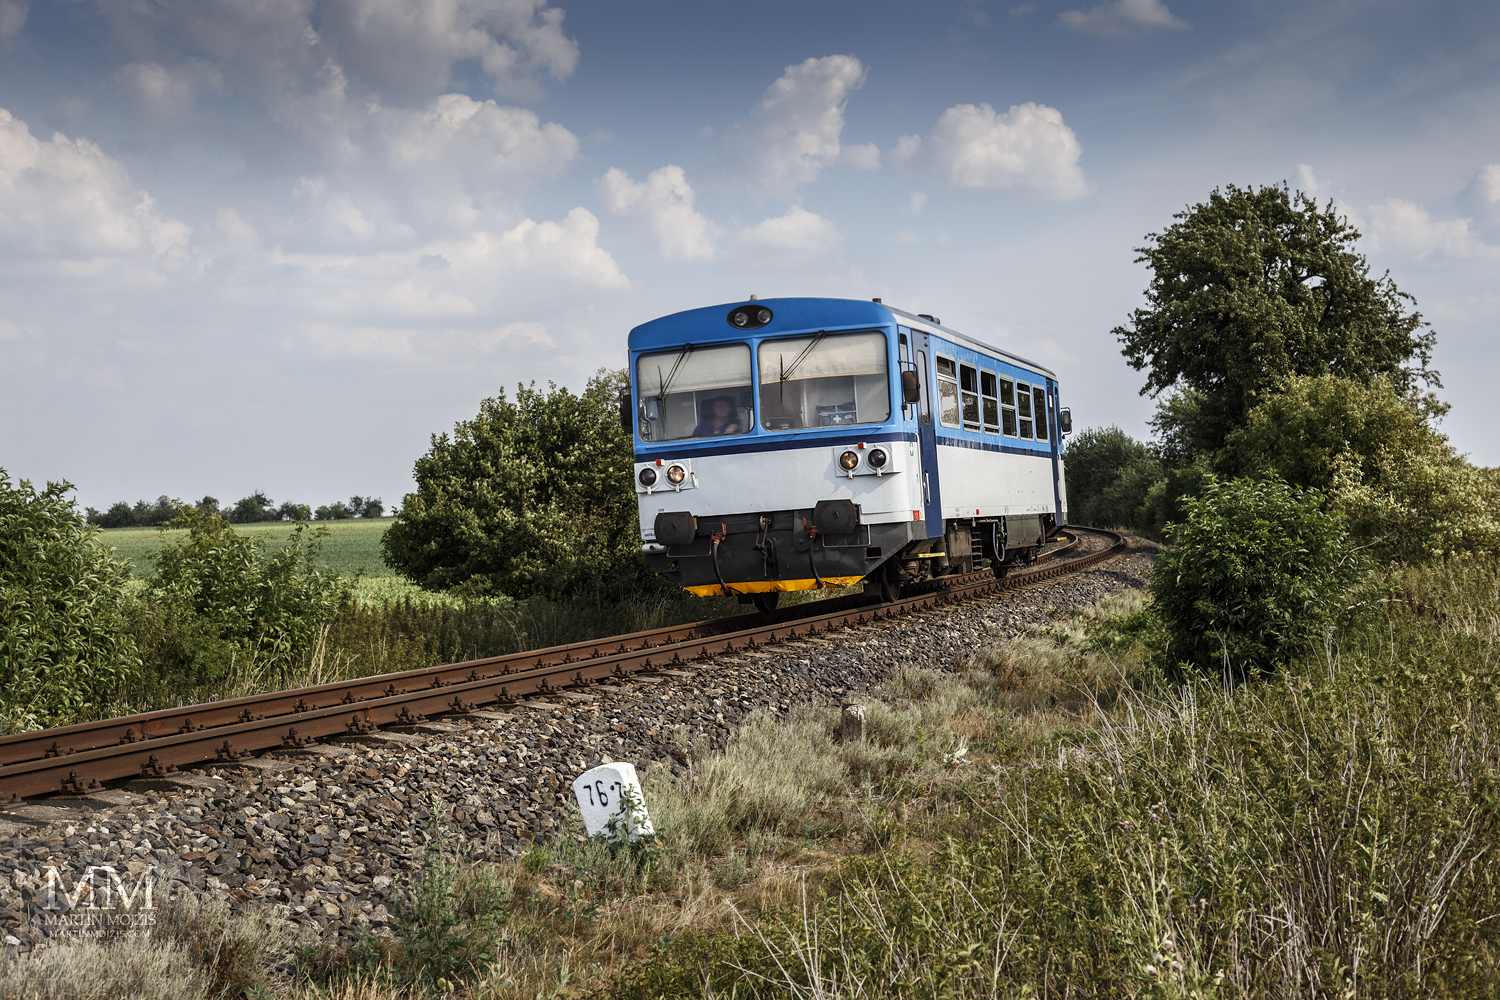 Large format, fine art photograph of small blue and white train. Martin Mojzis.